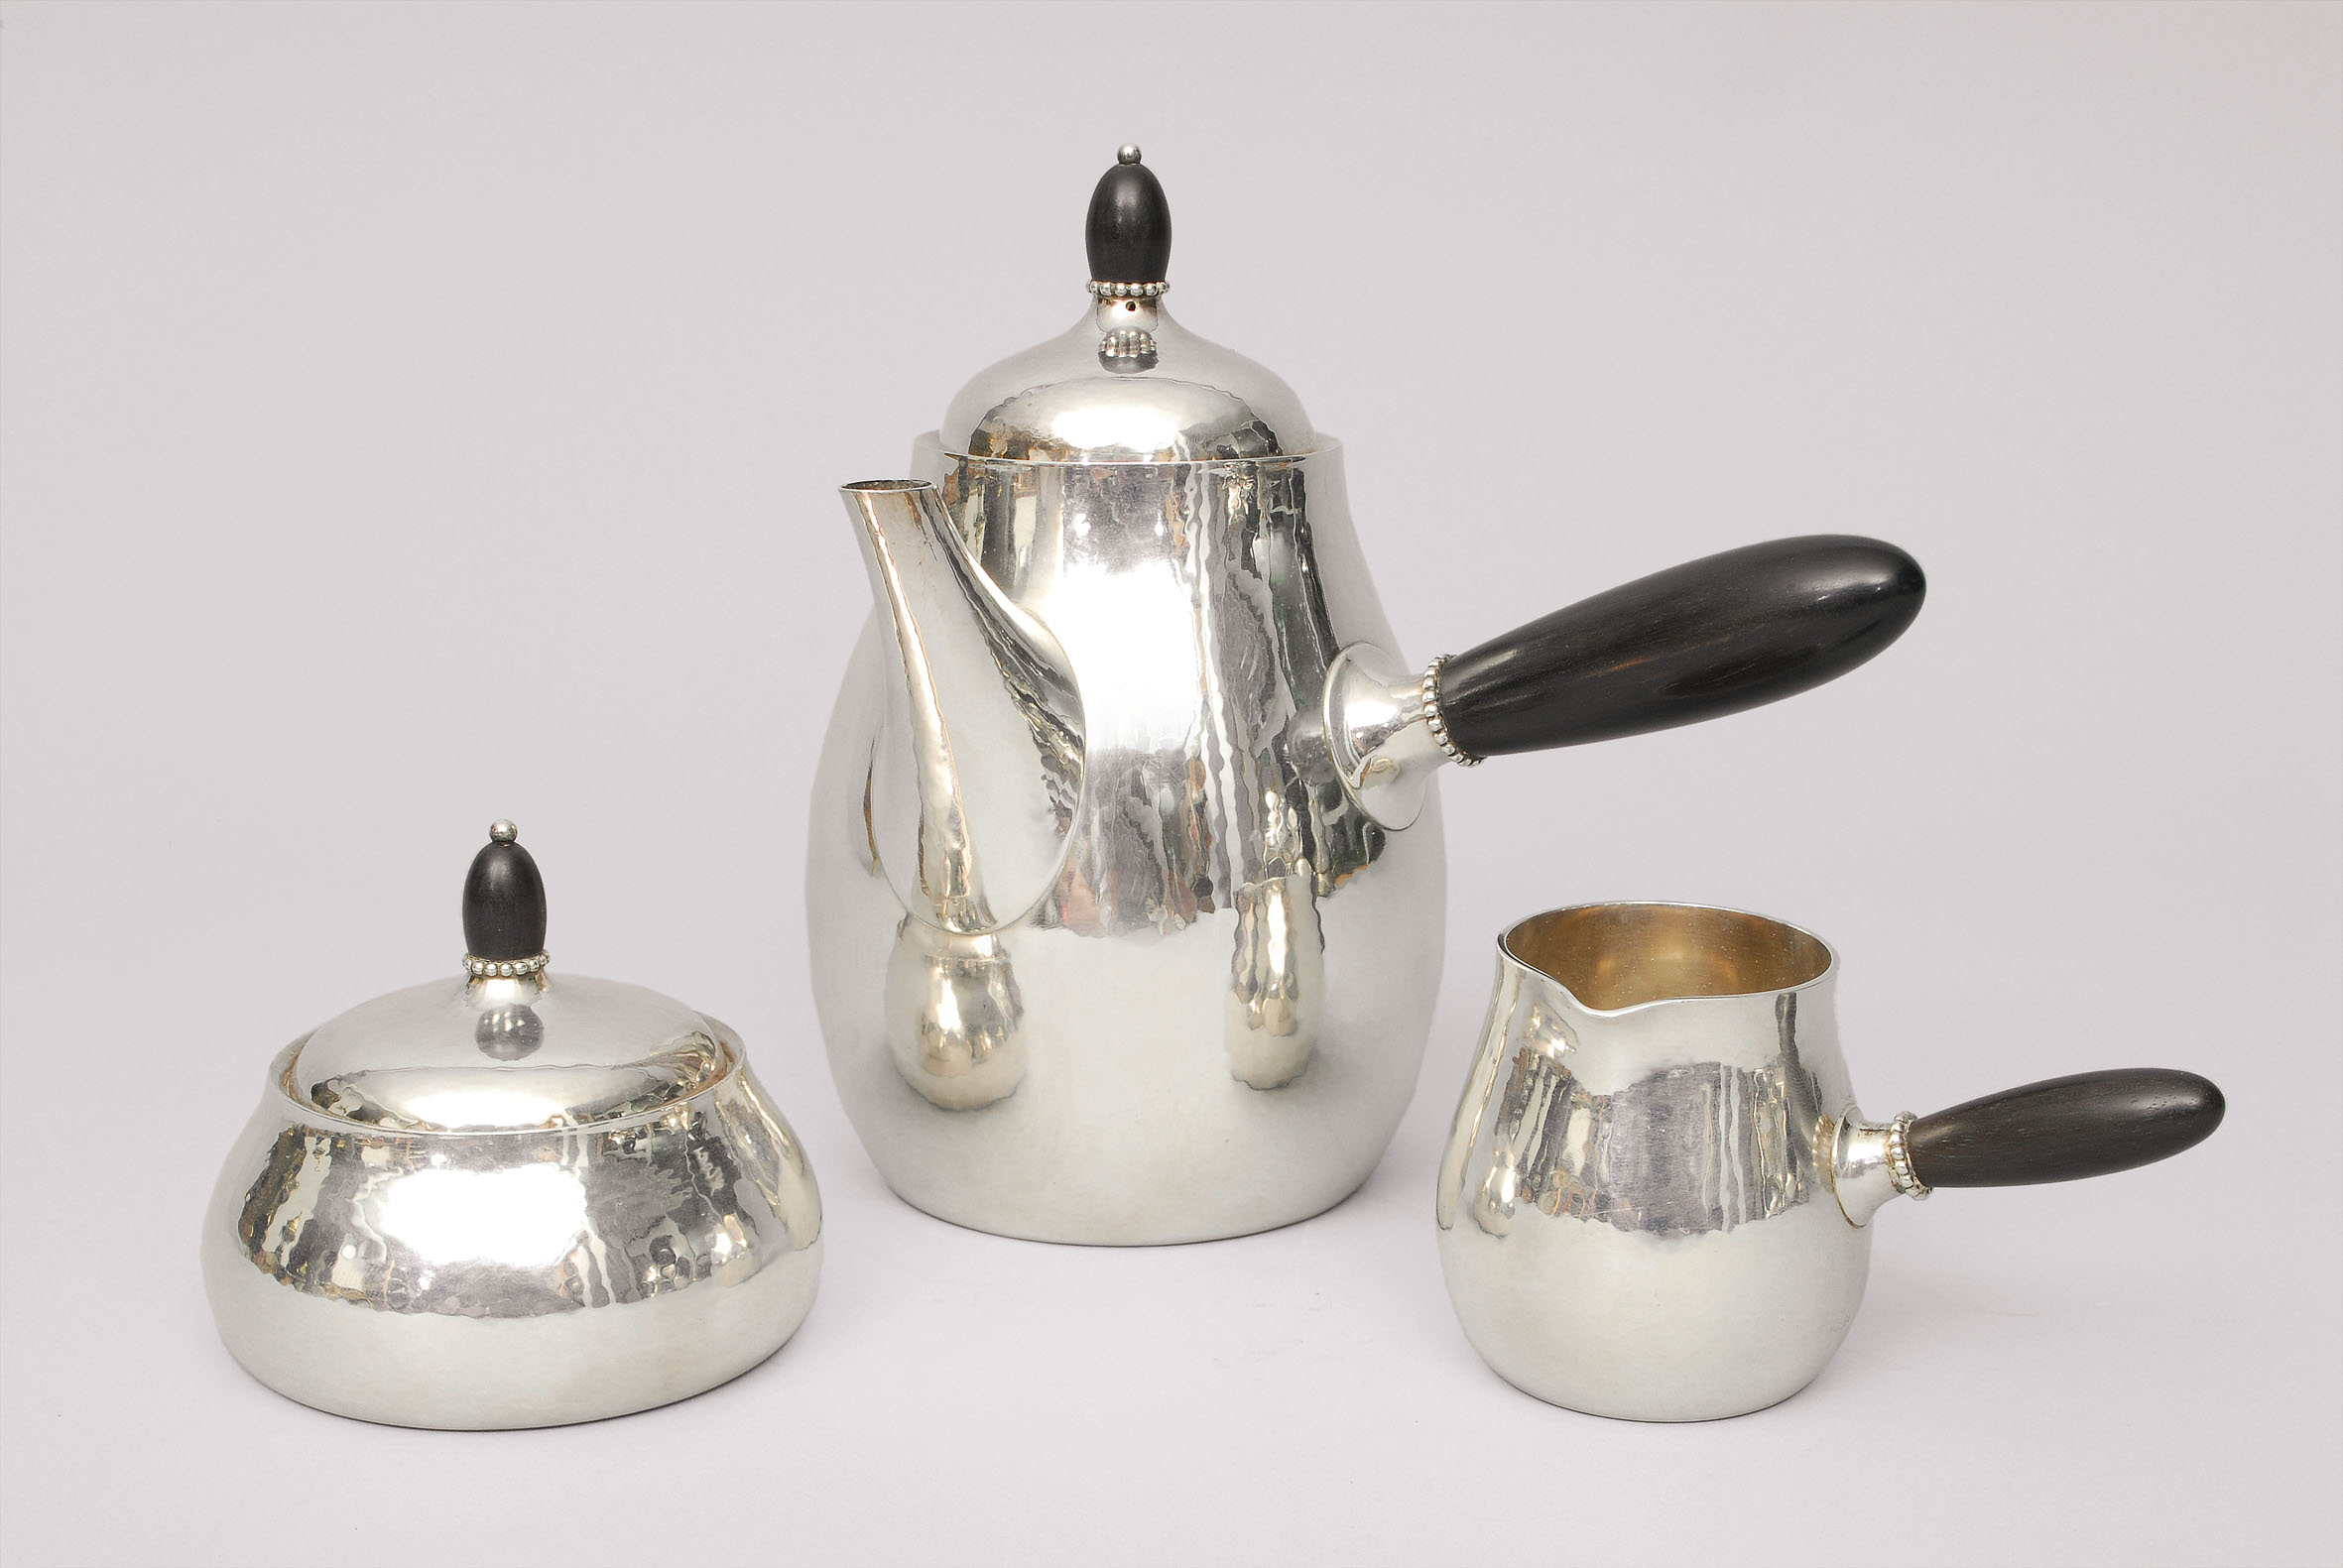 A chocolatière with small can and sugar bowl